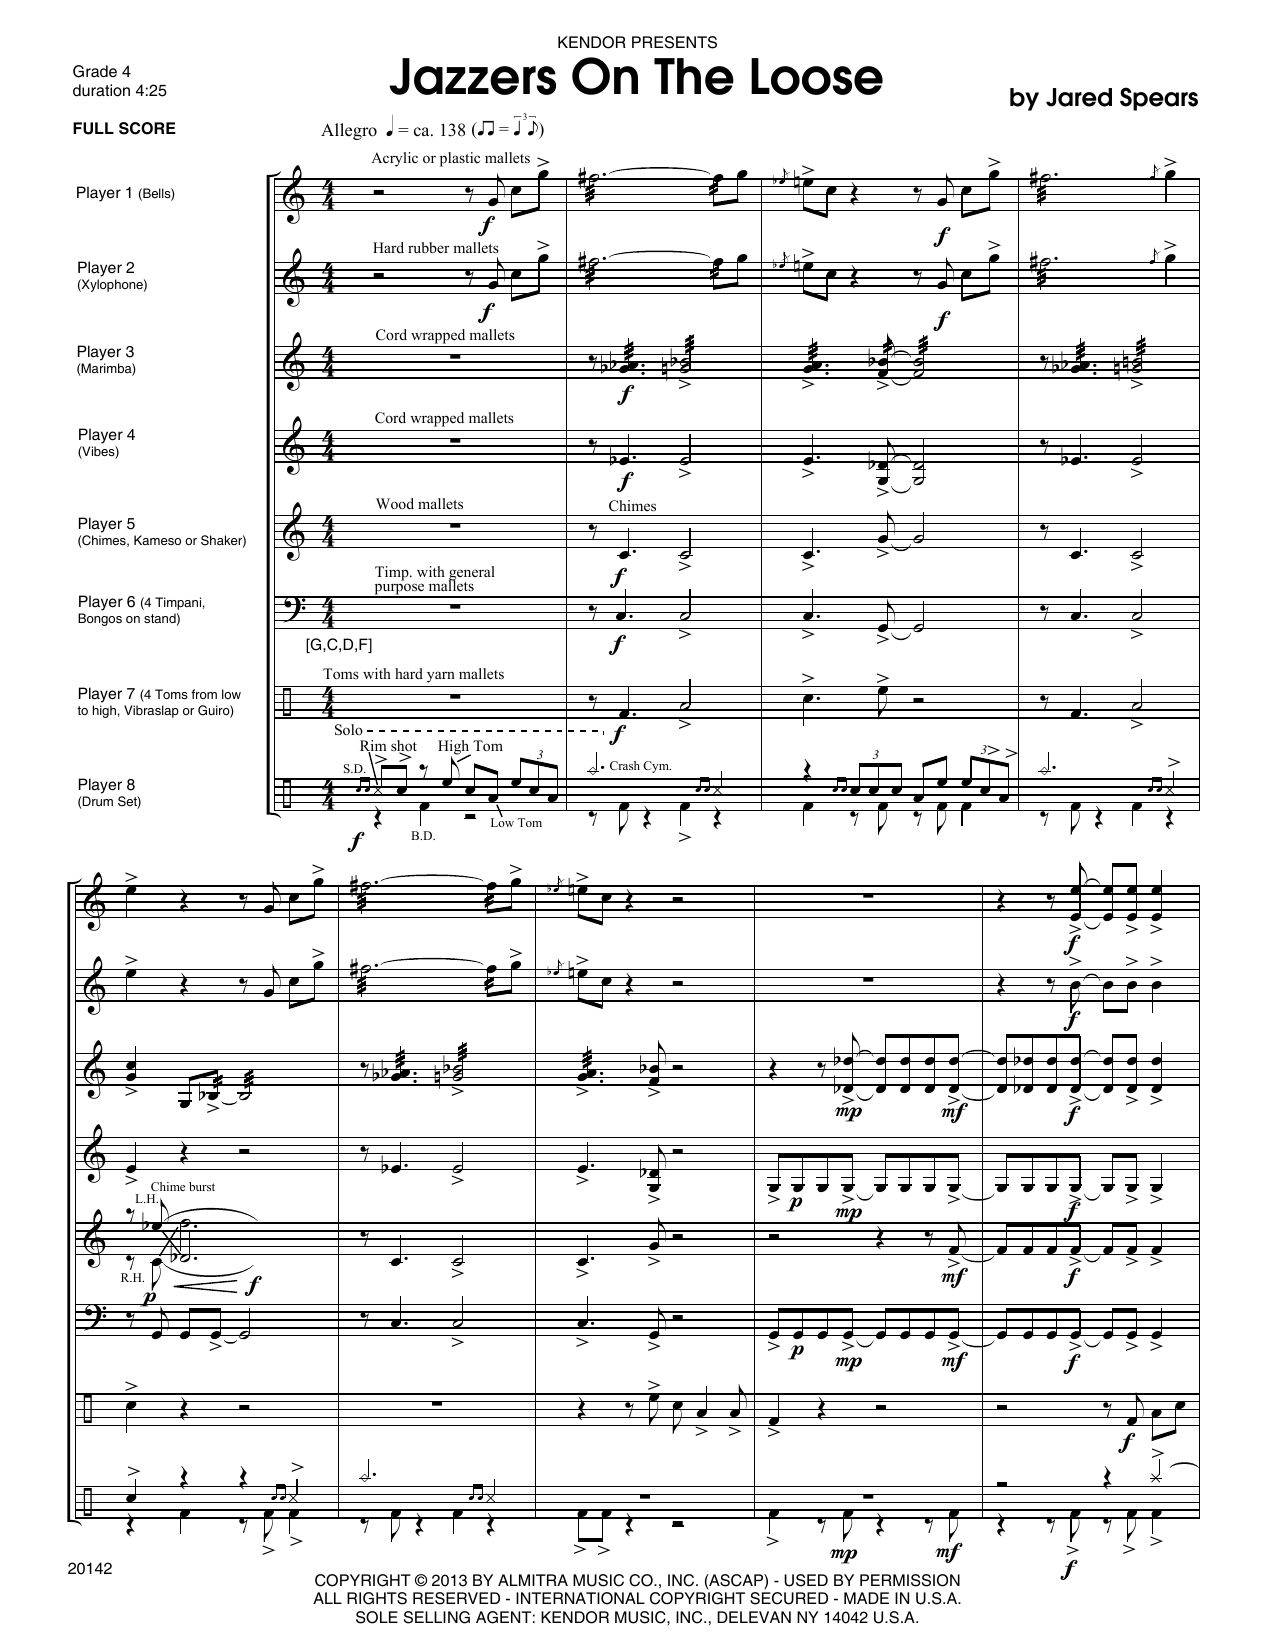 Download Jared Spears Jazzers On The Loose - Full Score Sheet Music